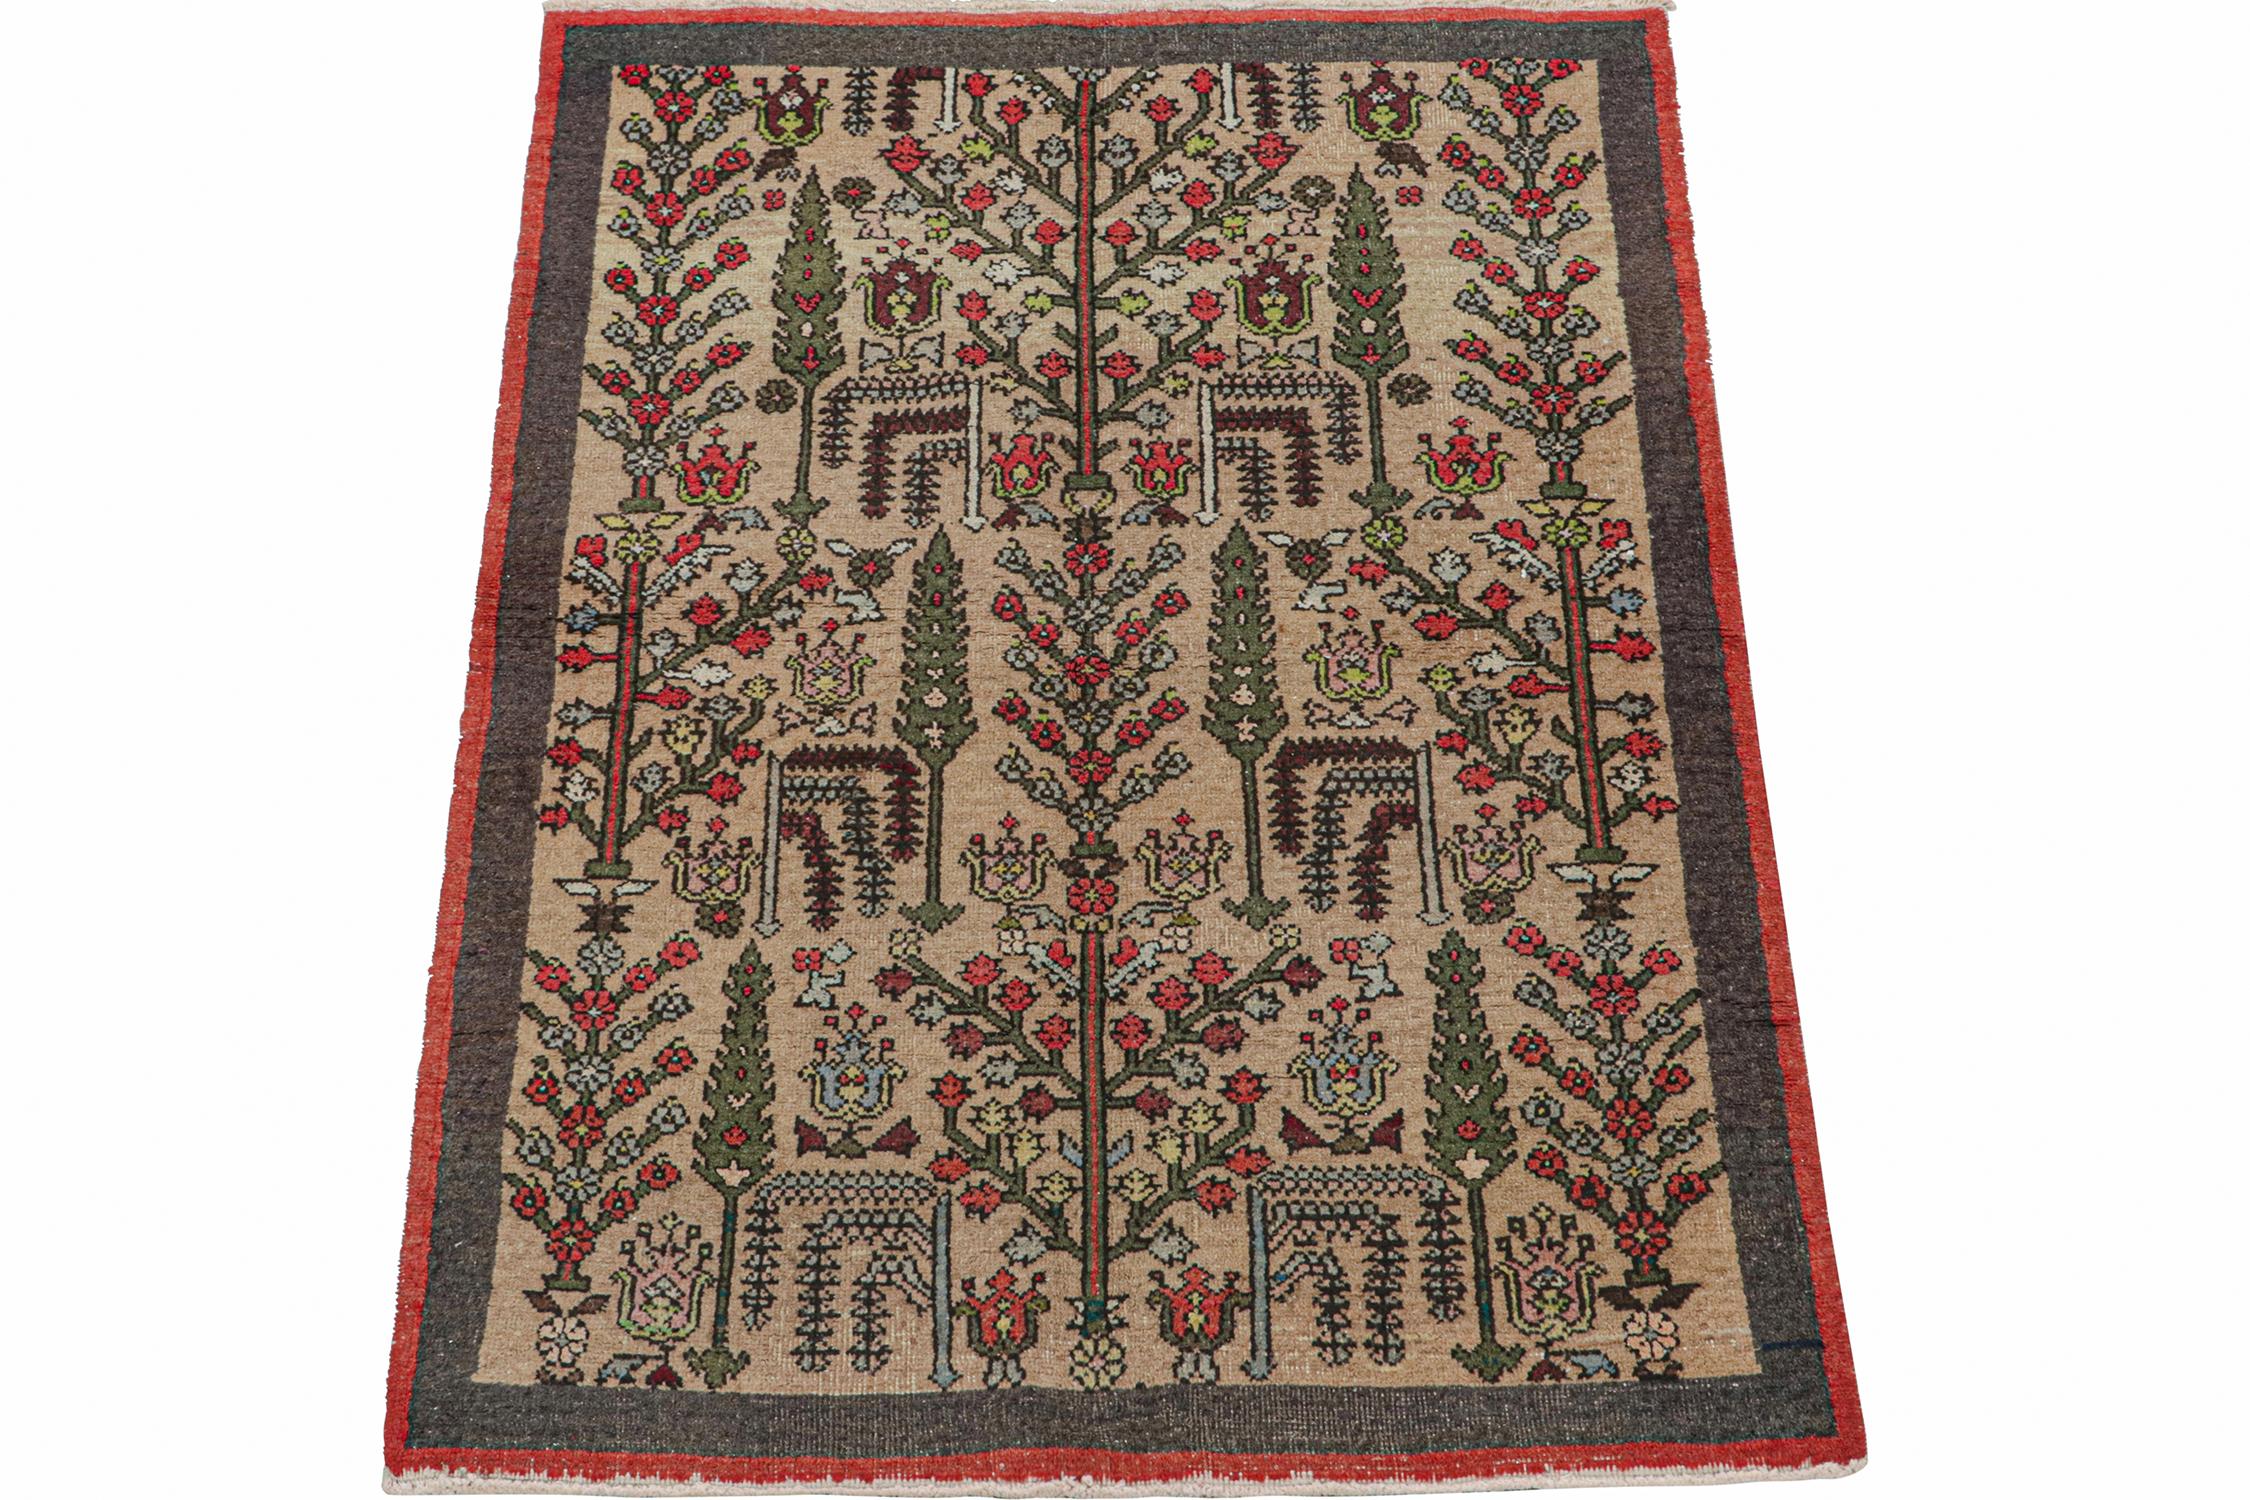 This vintage 3x6 runner is a new addition to Rug & Kilim’s Mid-Century Pasha Collection. Hand-knotted in wool circa 1960-1970, it’s a rare curation we believe may hail from mid-century Turkish designer Zeki Müren.
 
This rug reflects a uniquely